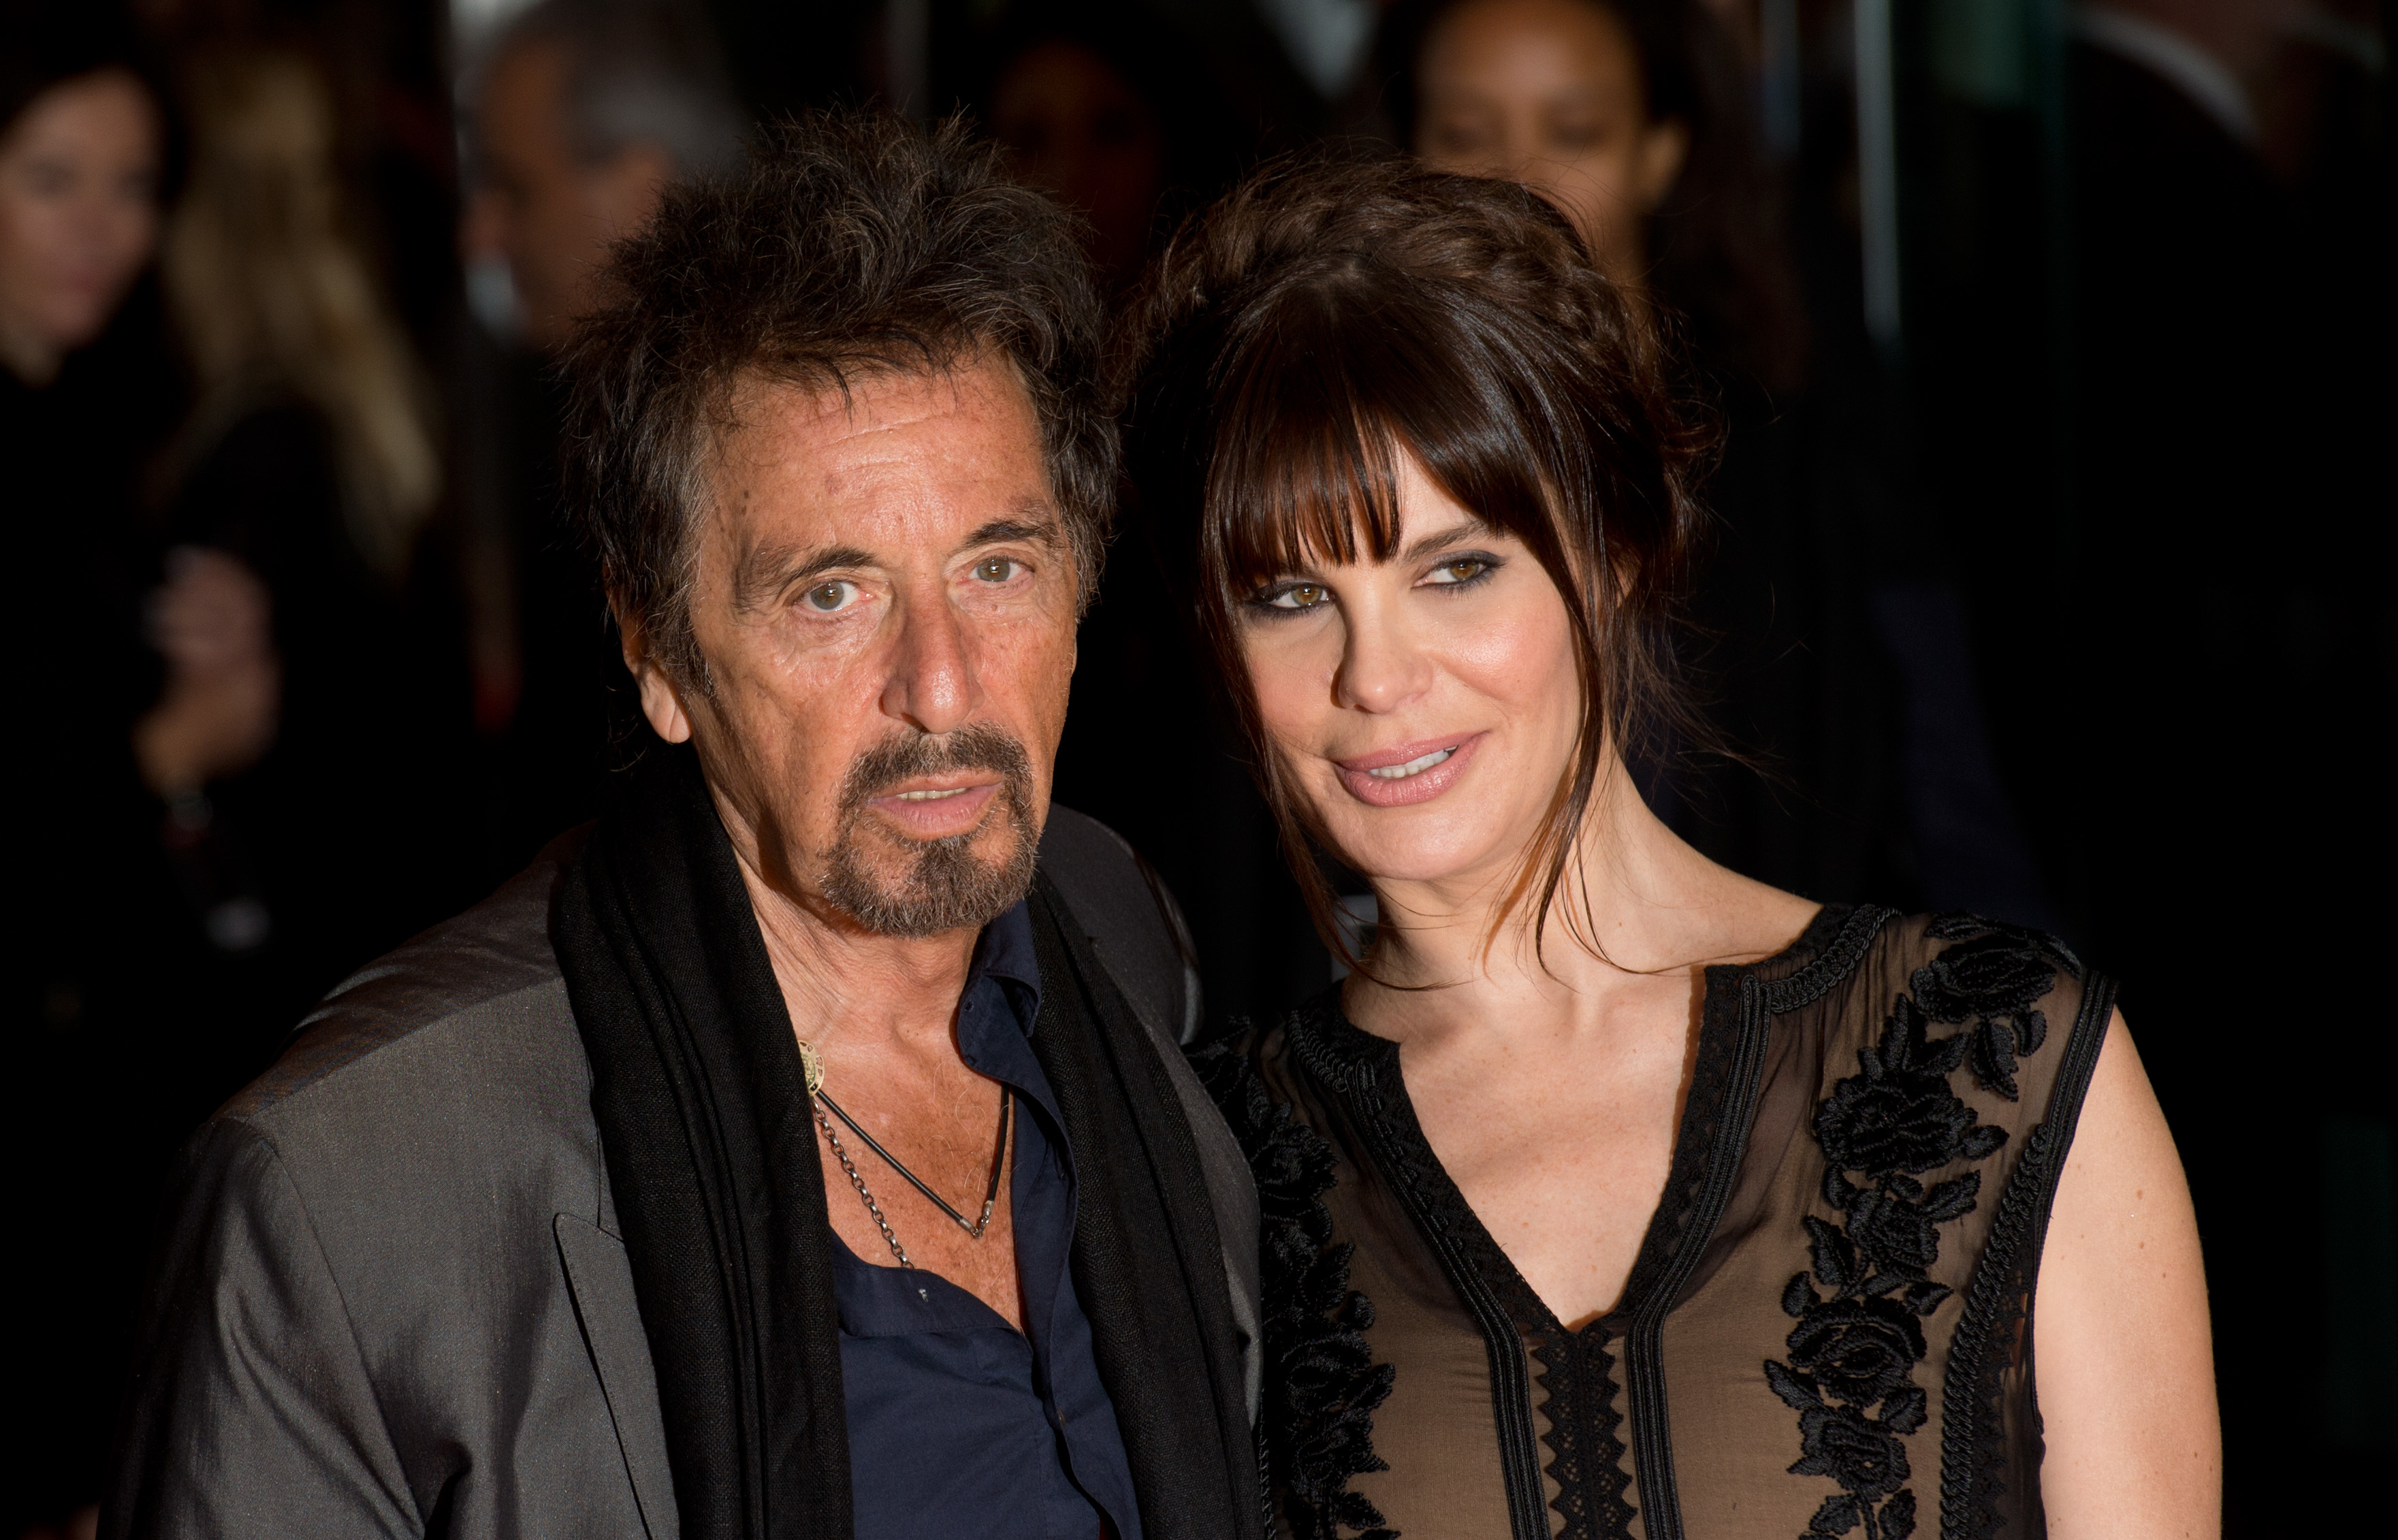 Al Pacino and Lucila Sola arriving at the screening of "Salome And Wilde Salome" at the BFI Southbank in London | Source: Getty Images